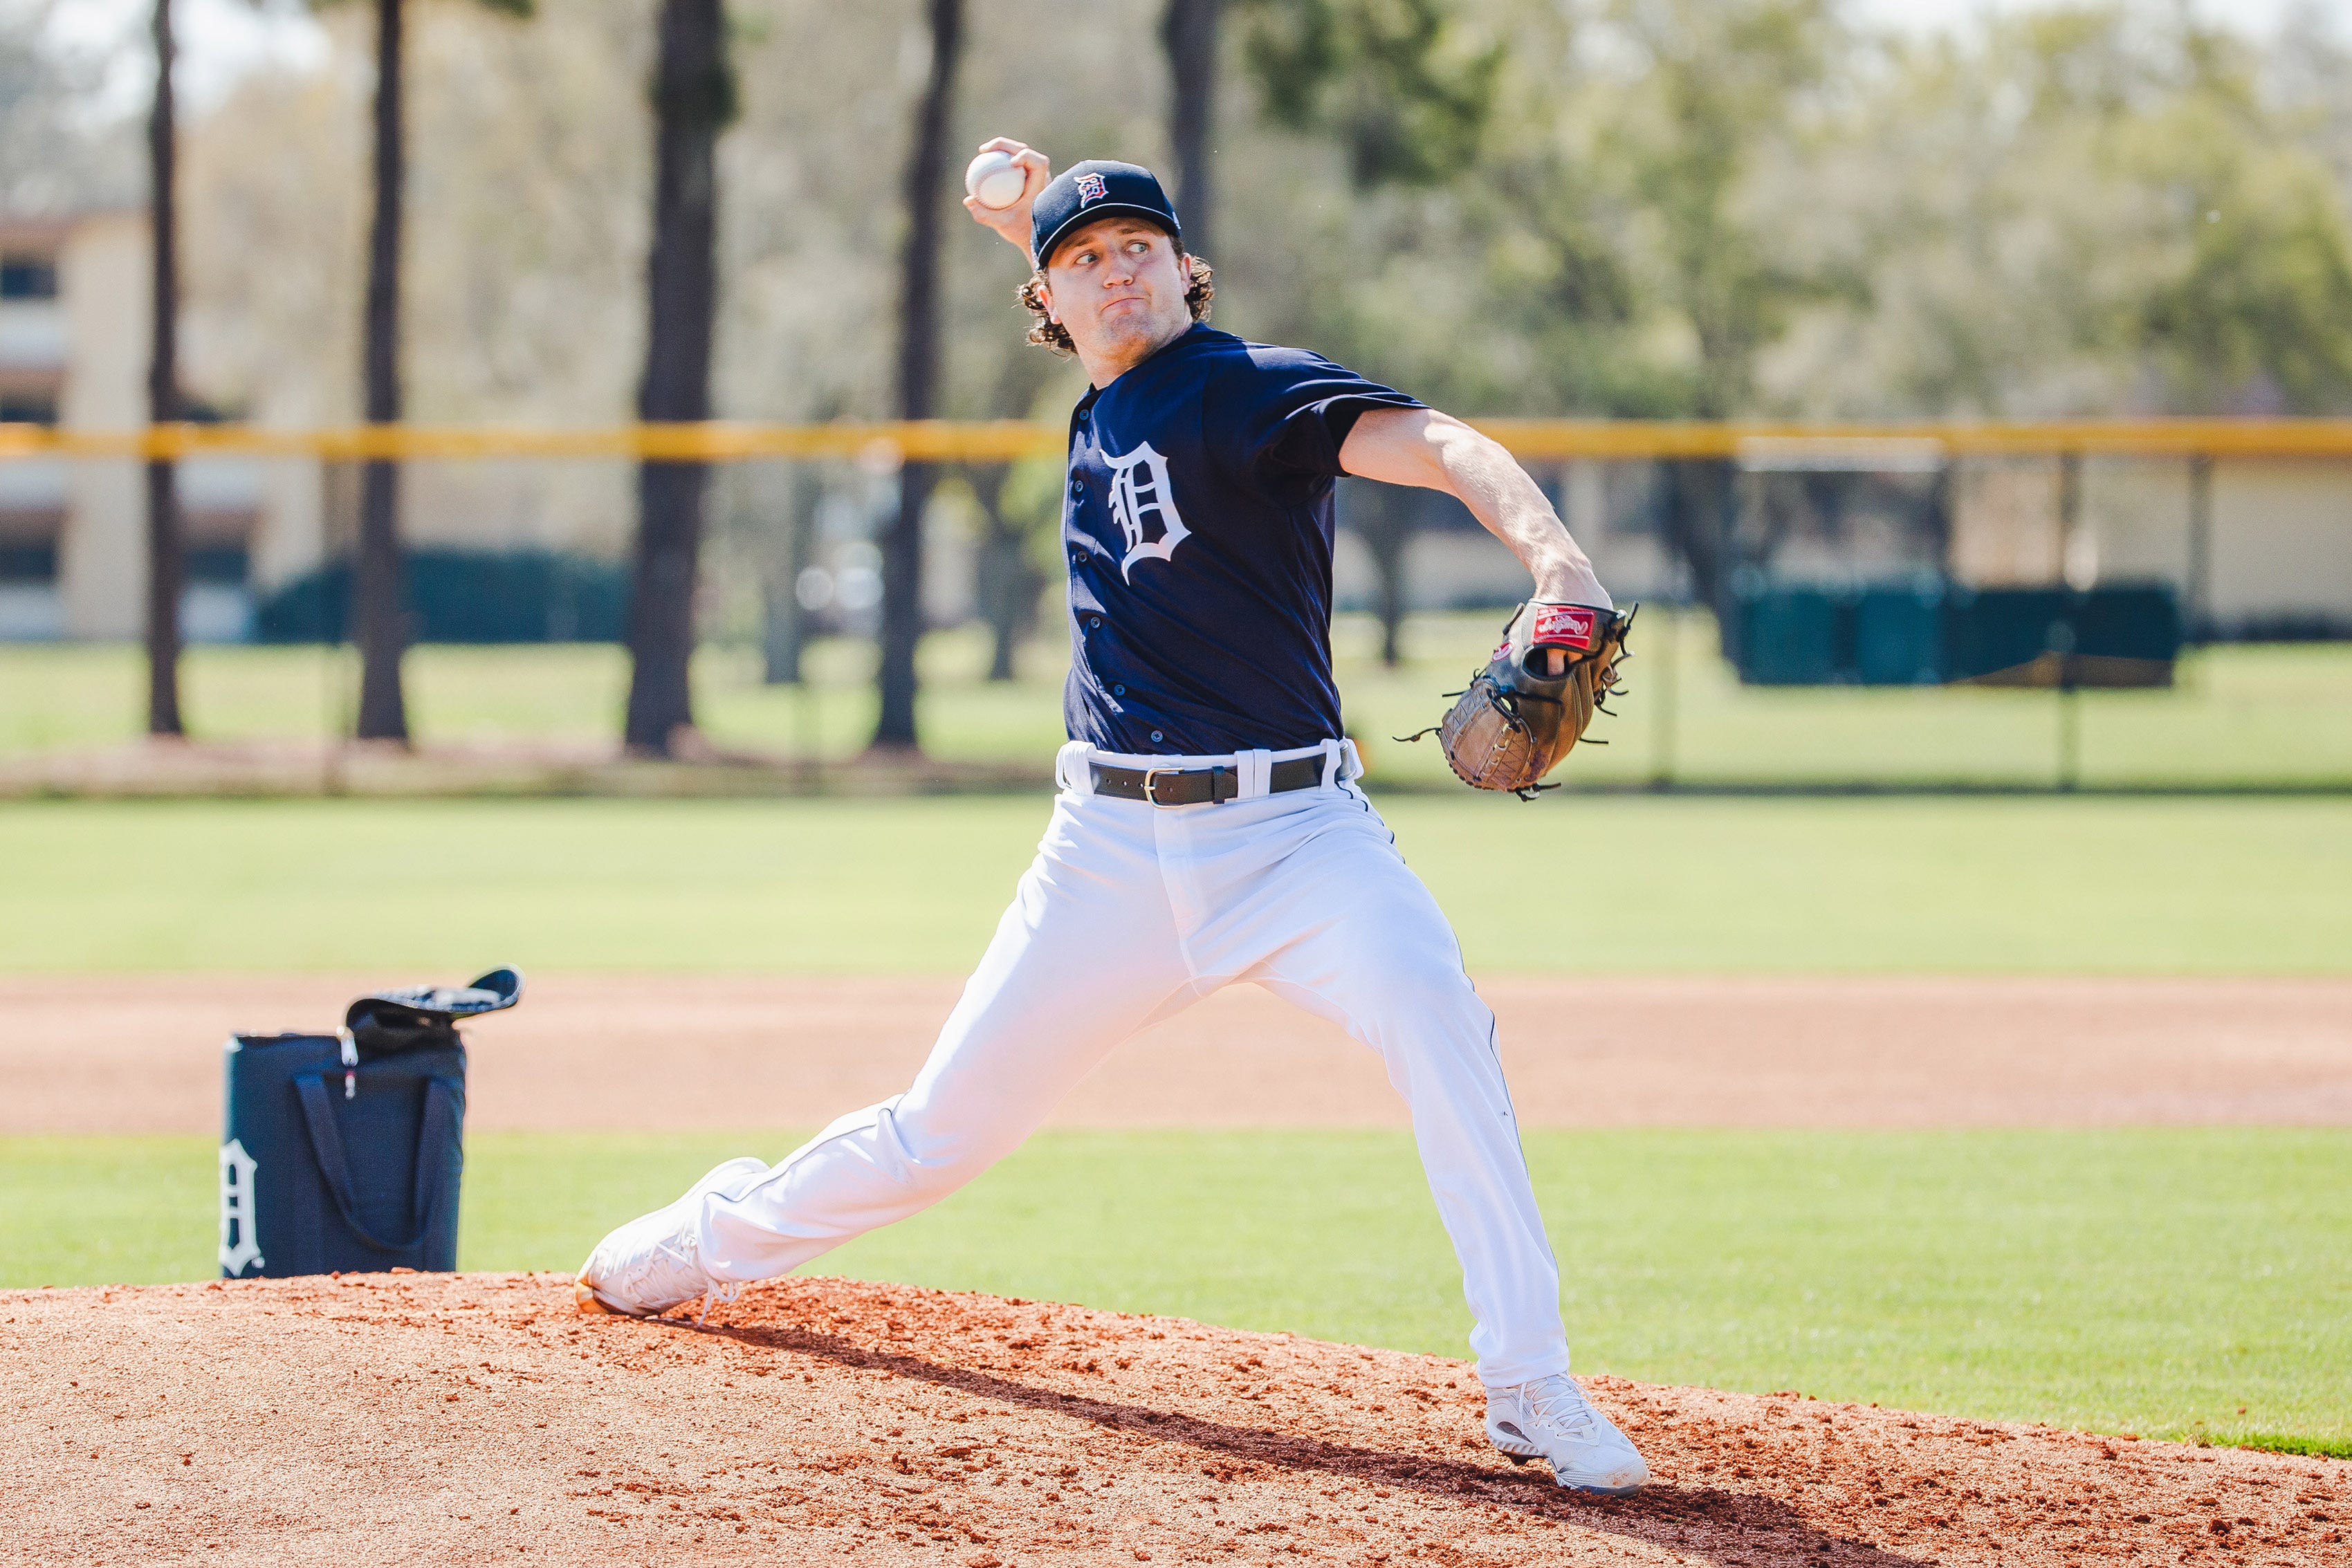 Tigers pitcher Casey Mize throws live batting practice in Lakeland, Florida on February 24, 2021.